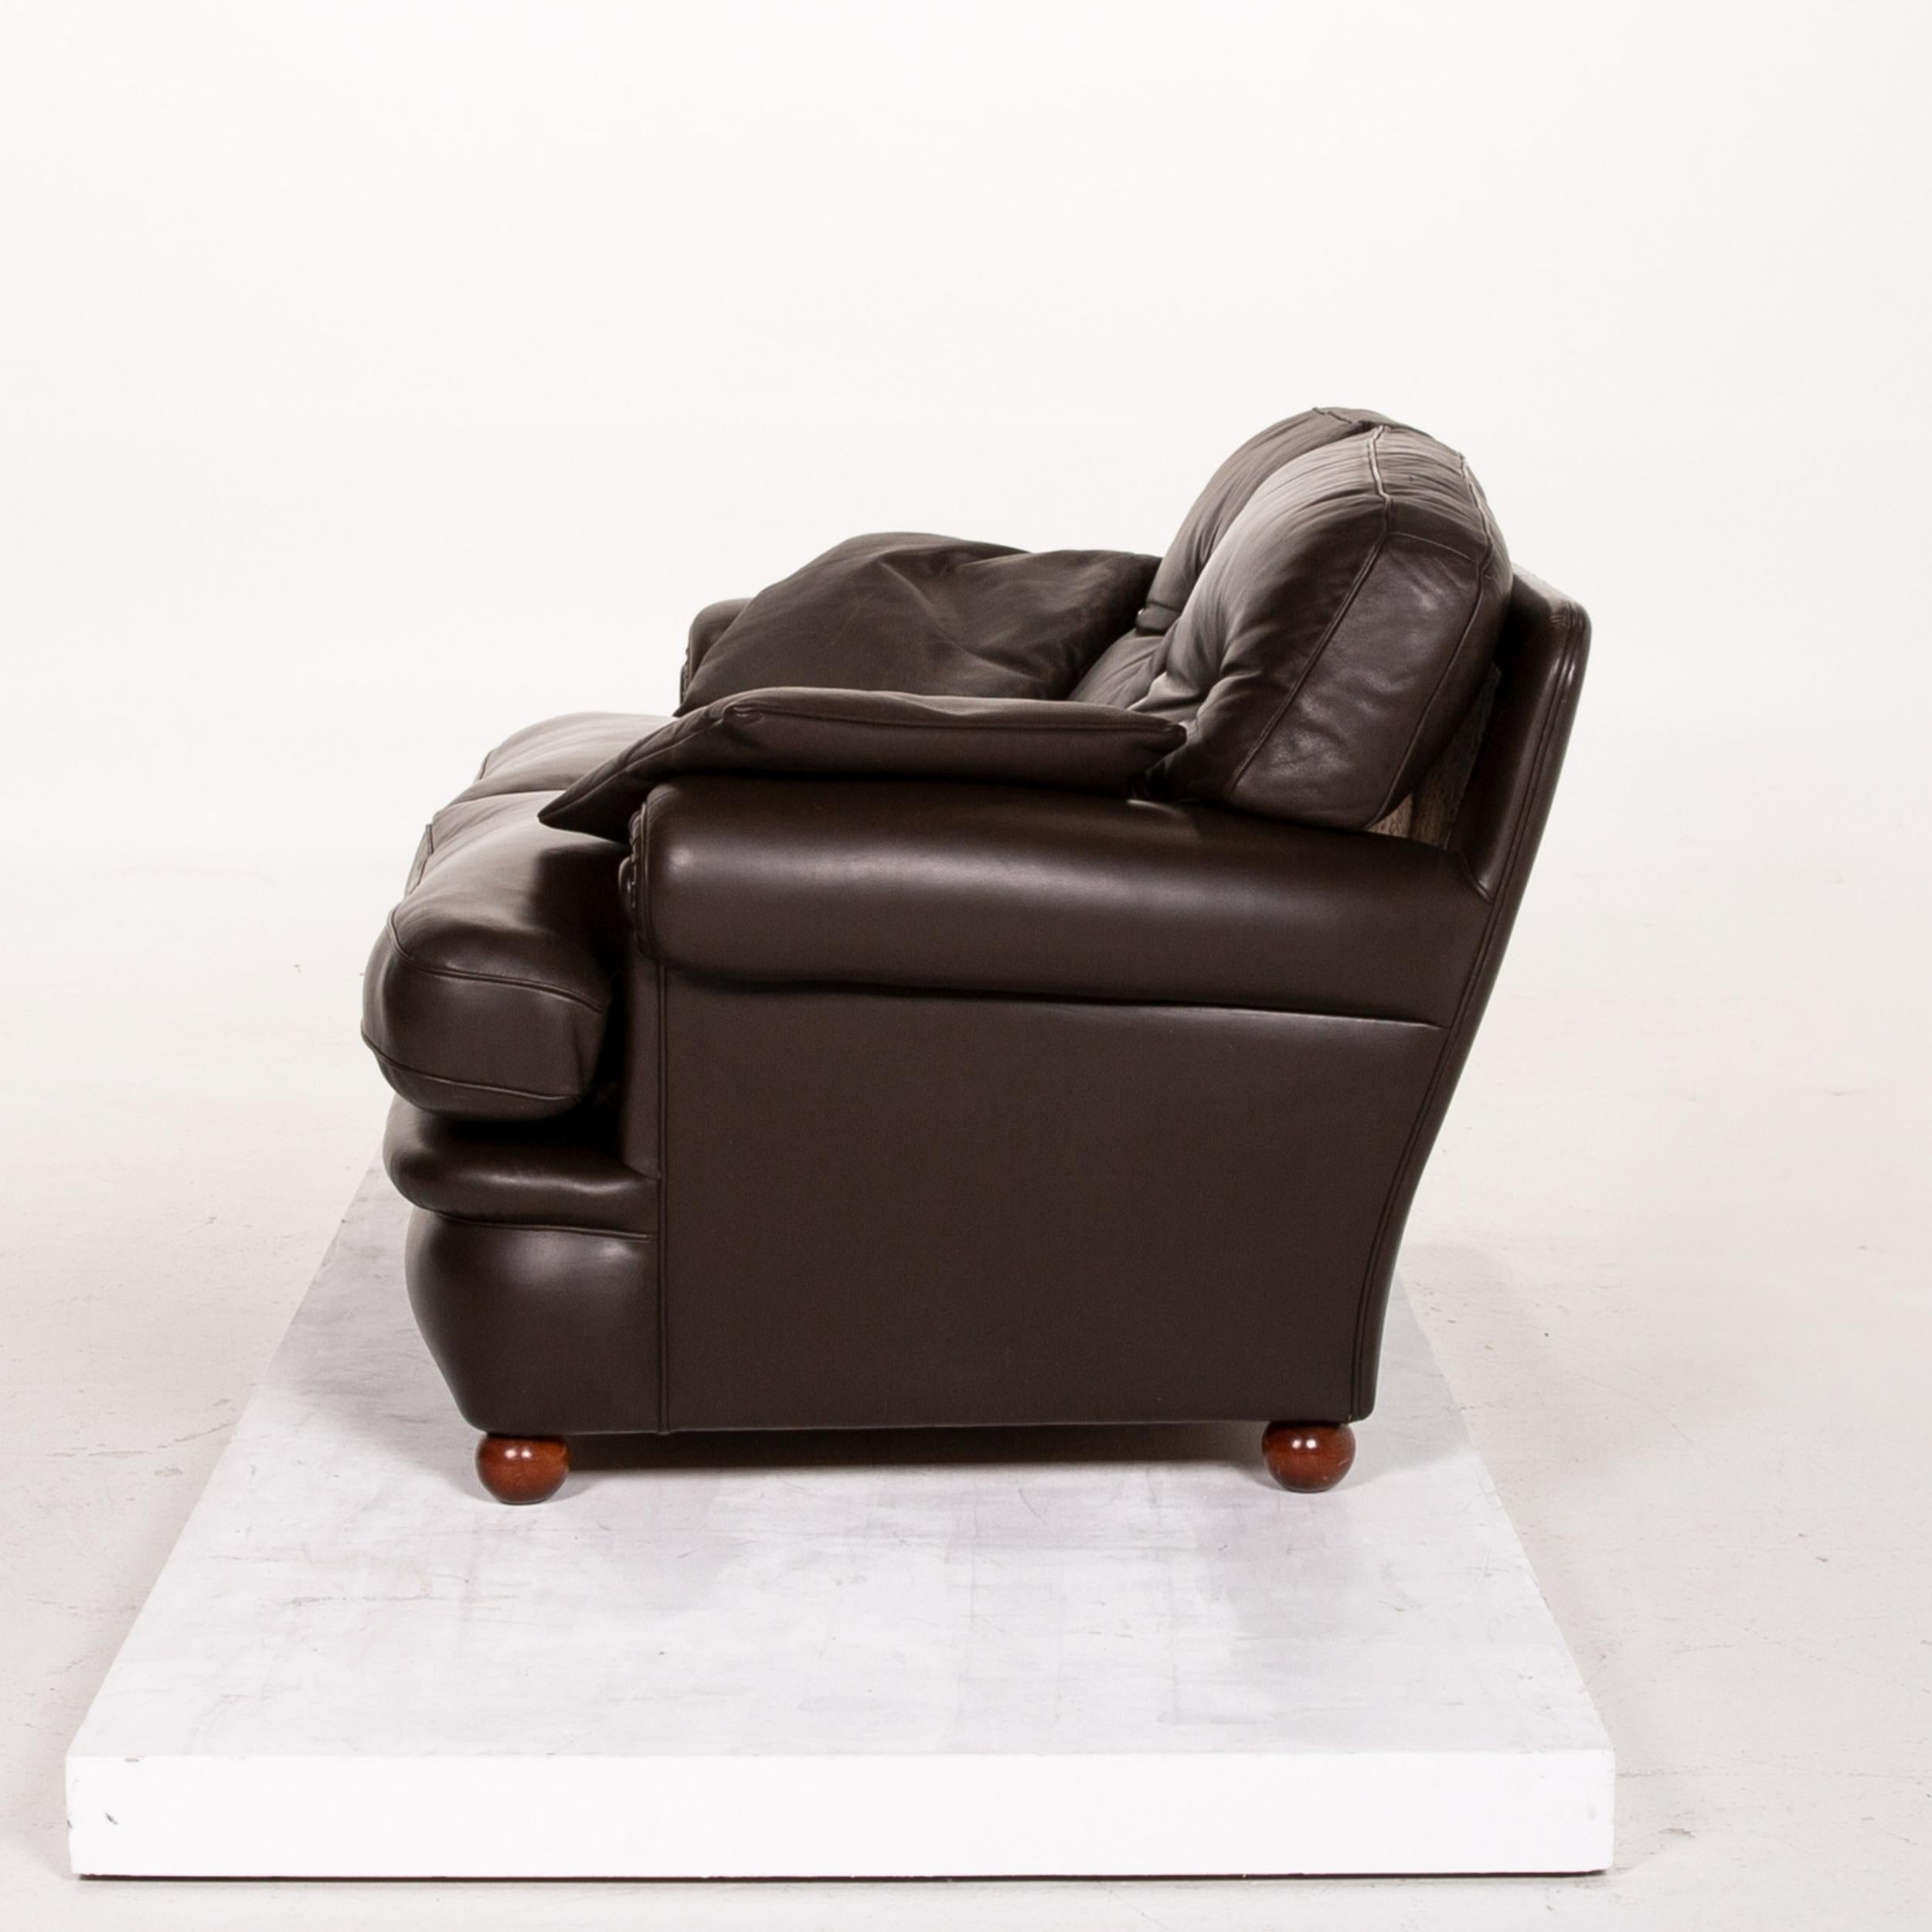 Poltrona Frau Leather Sofa Dark Brown Brown Two-Seat Couch 4